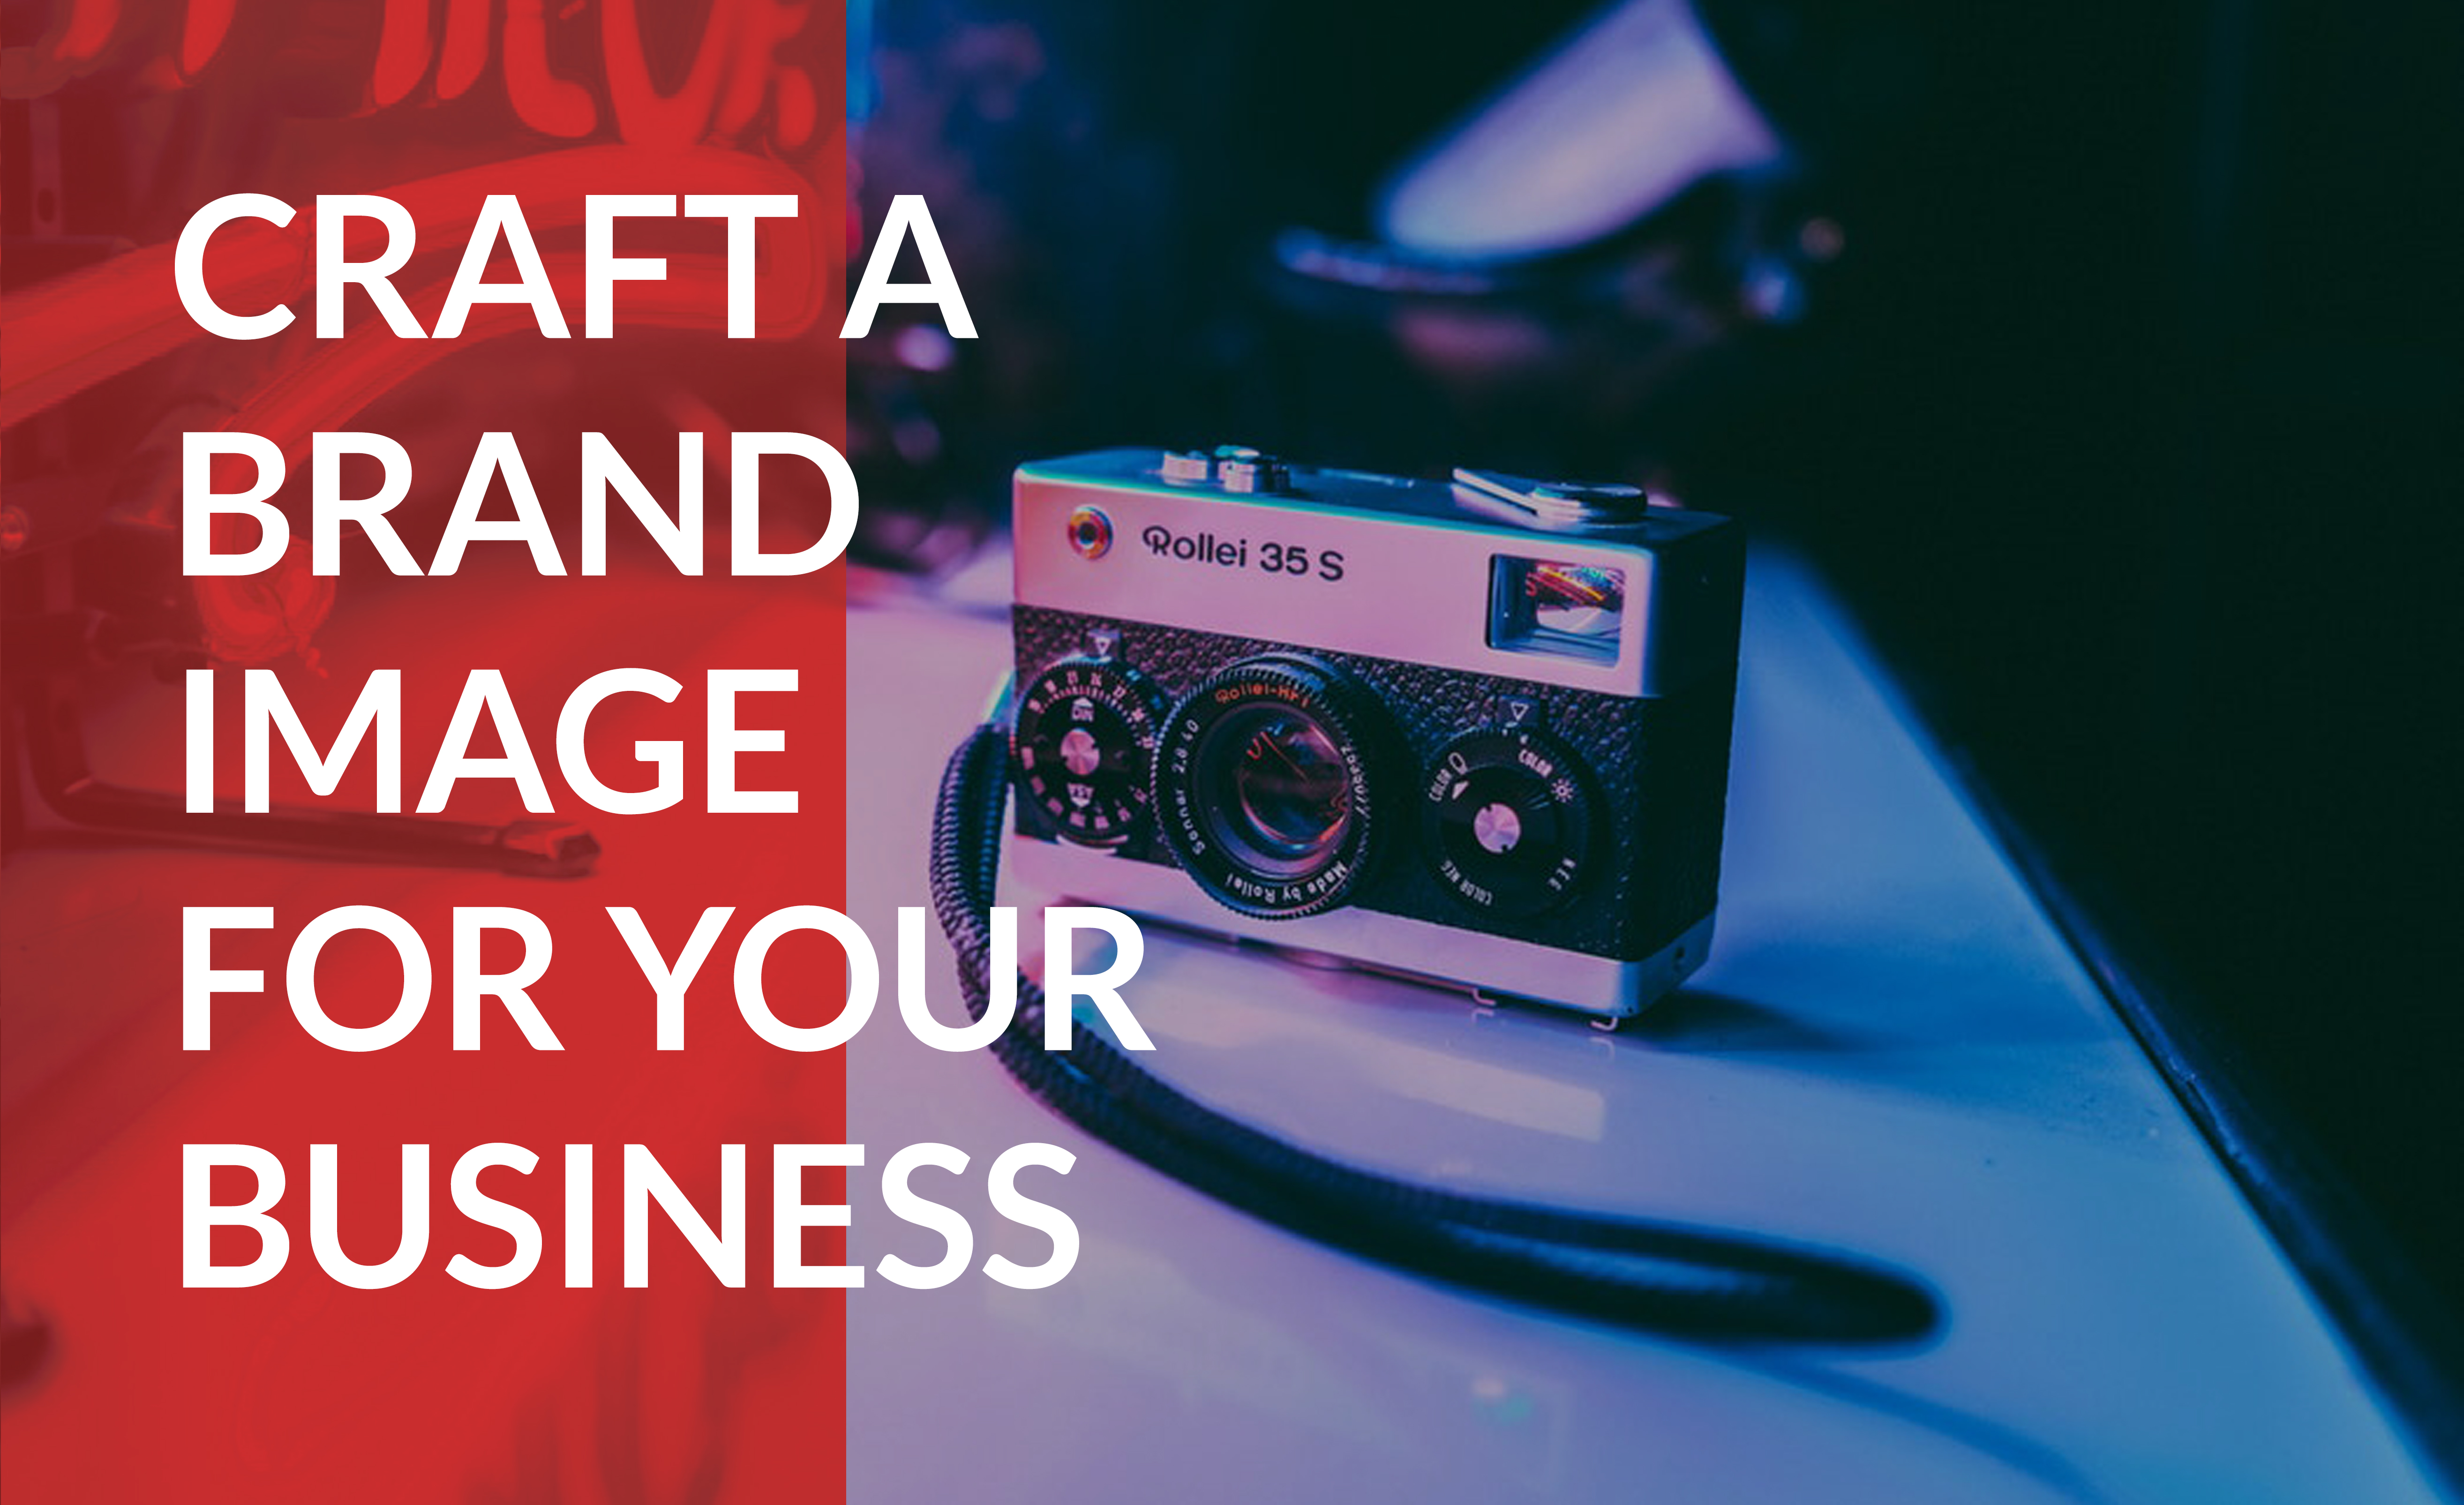 Craft a brand image for your business that speaks to the right audience.